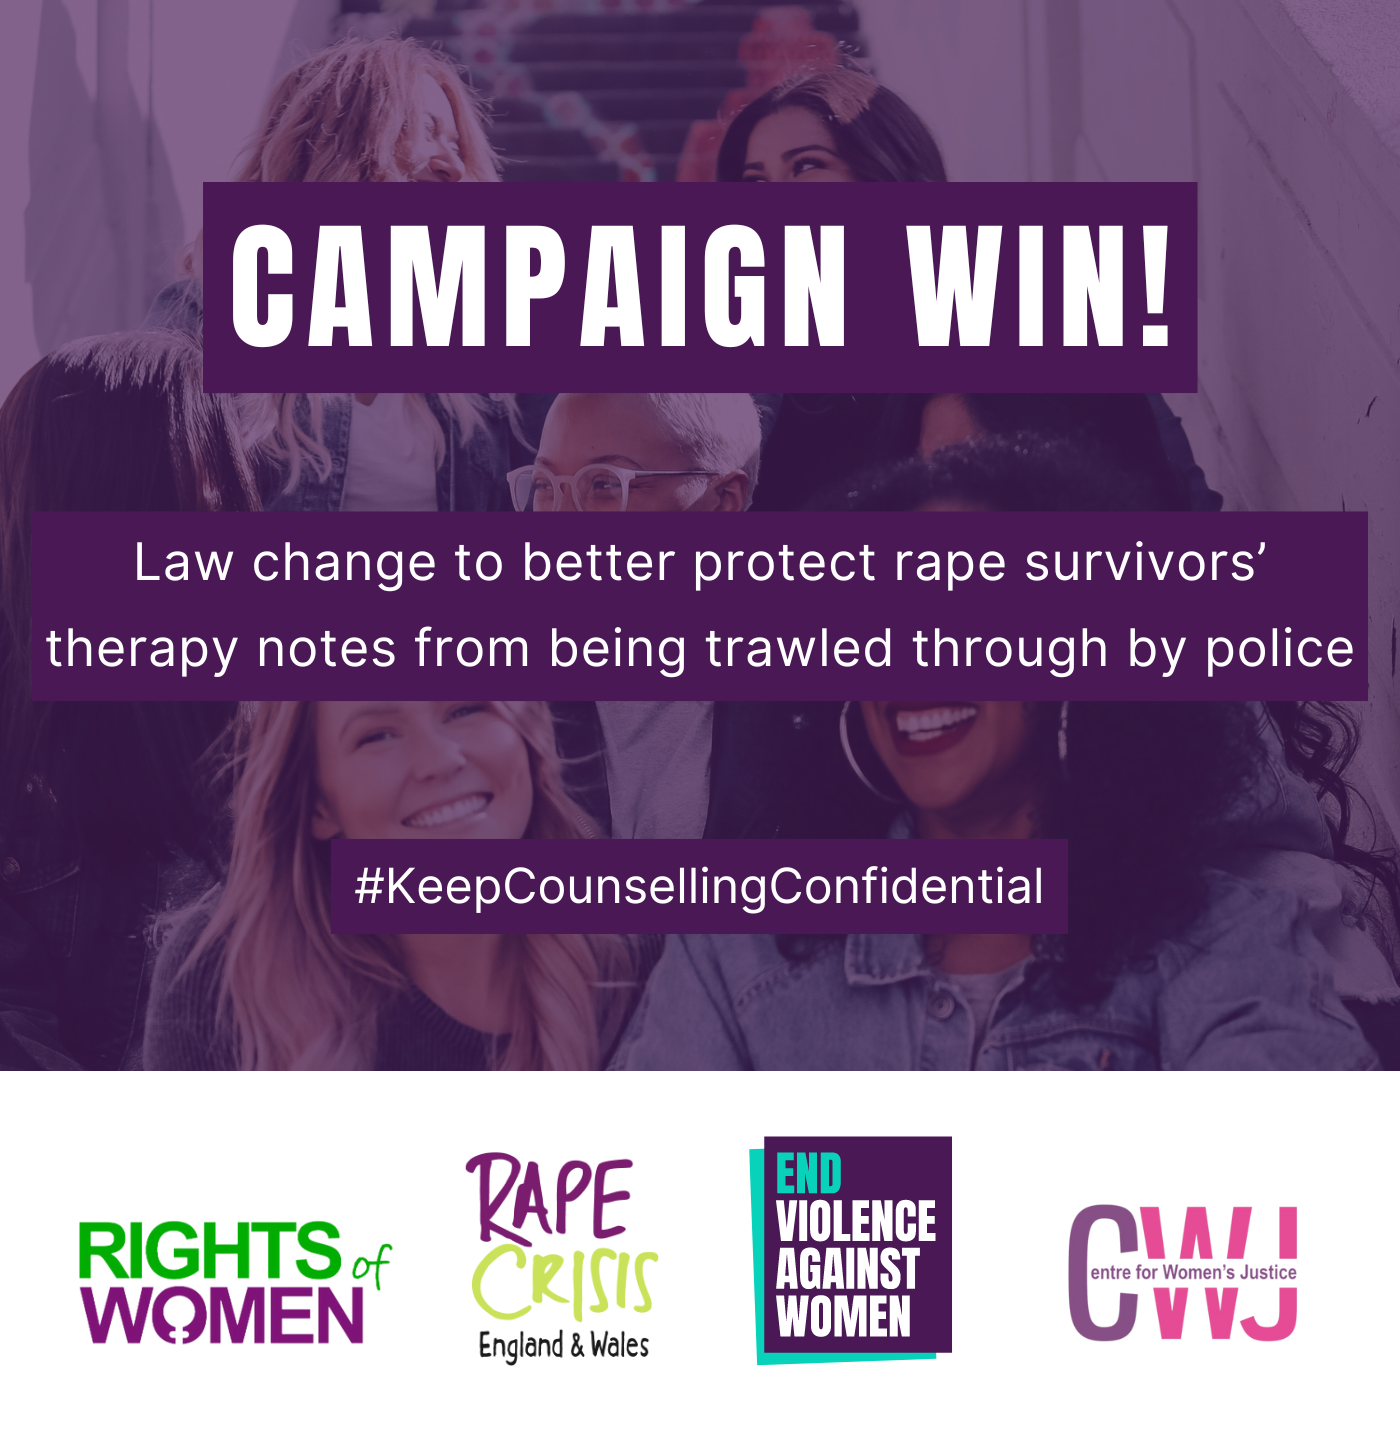 CAMPAIGN WIN! Law change to better protect rape survivors’ therapy notes from being trawled through by police